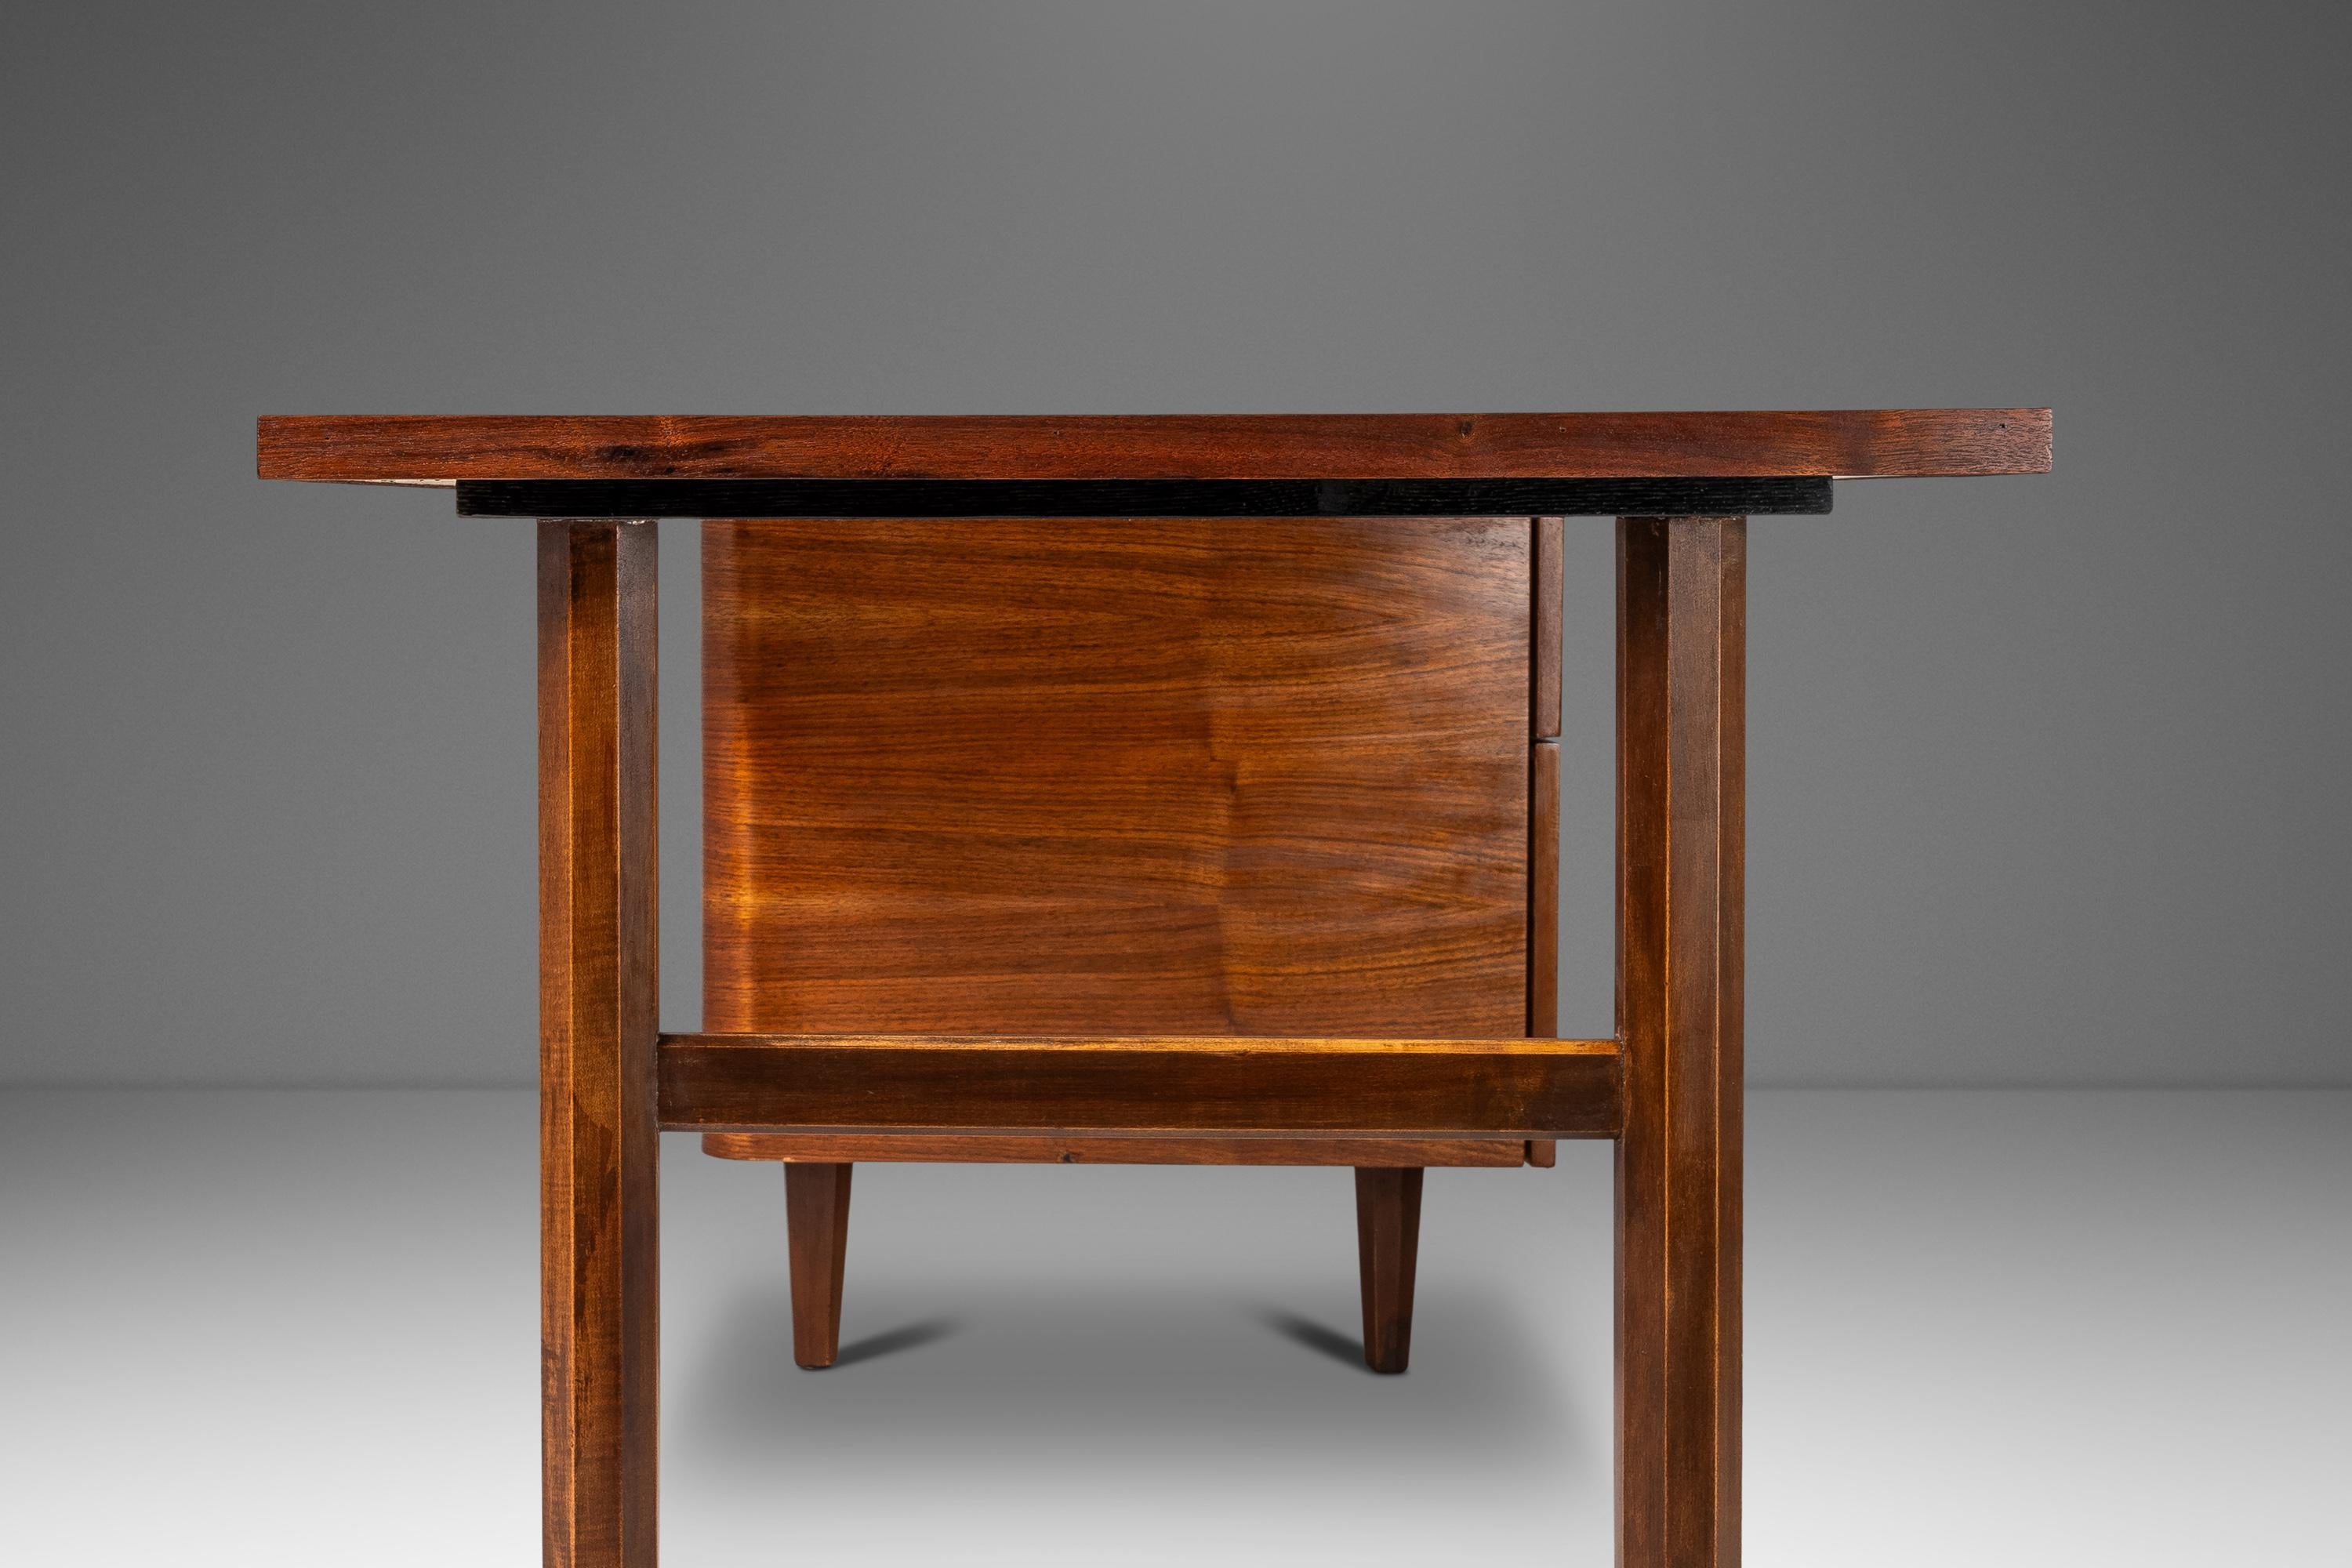 Restored Mid-Century Modern Writers Desk in Walnut with Leather Top, USA, 1960's For Sale 8